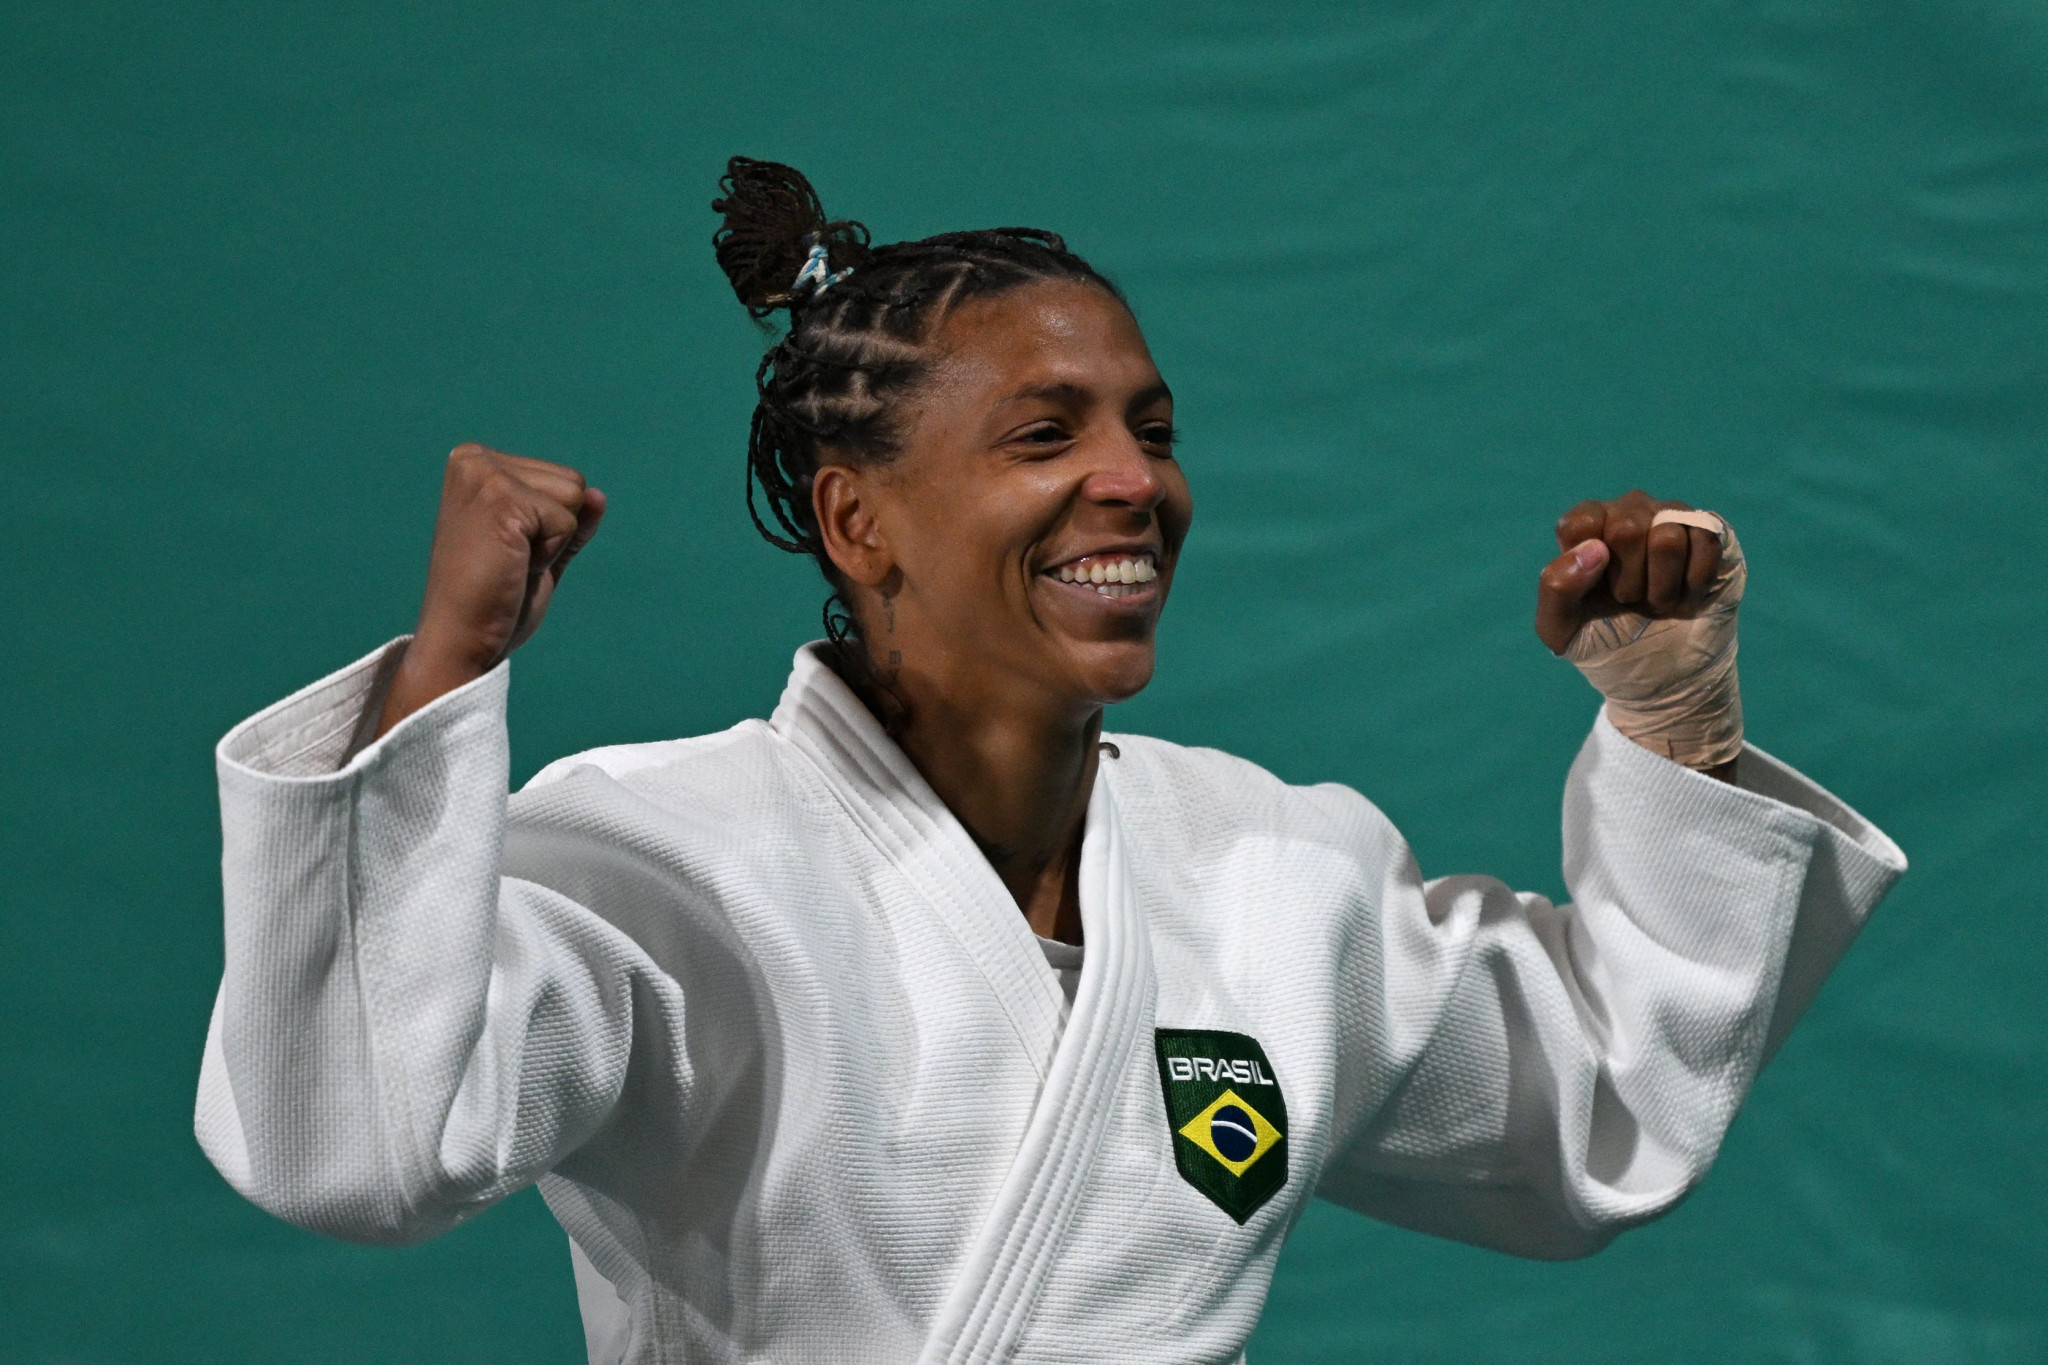 Rafaela Silva of Brazil was stripped of her gold medal at the last Pan American Games due to a positive doping test, but triumphed at Santiago 2023 ©Getty Images